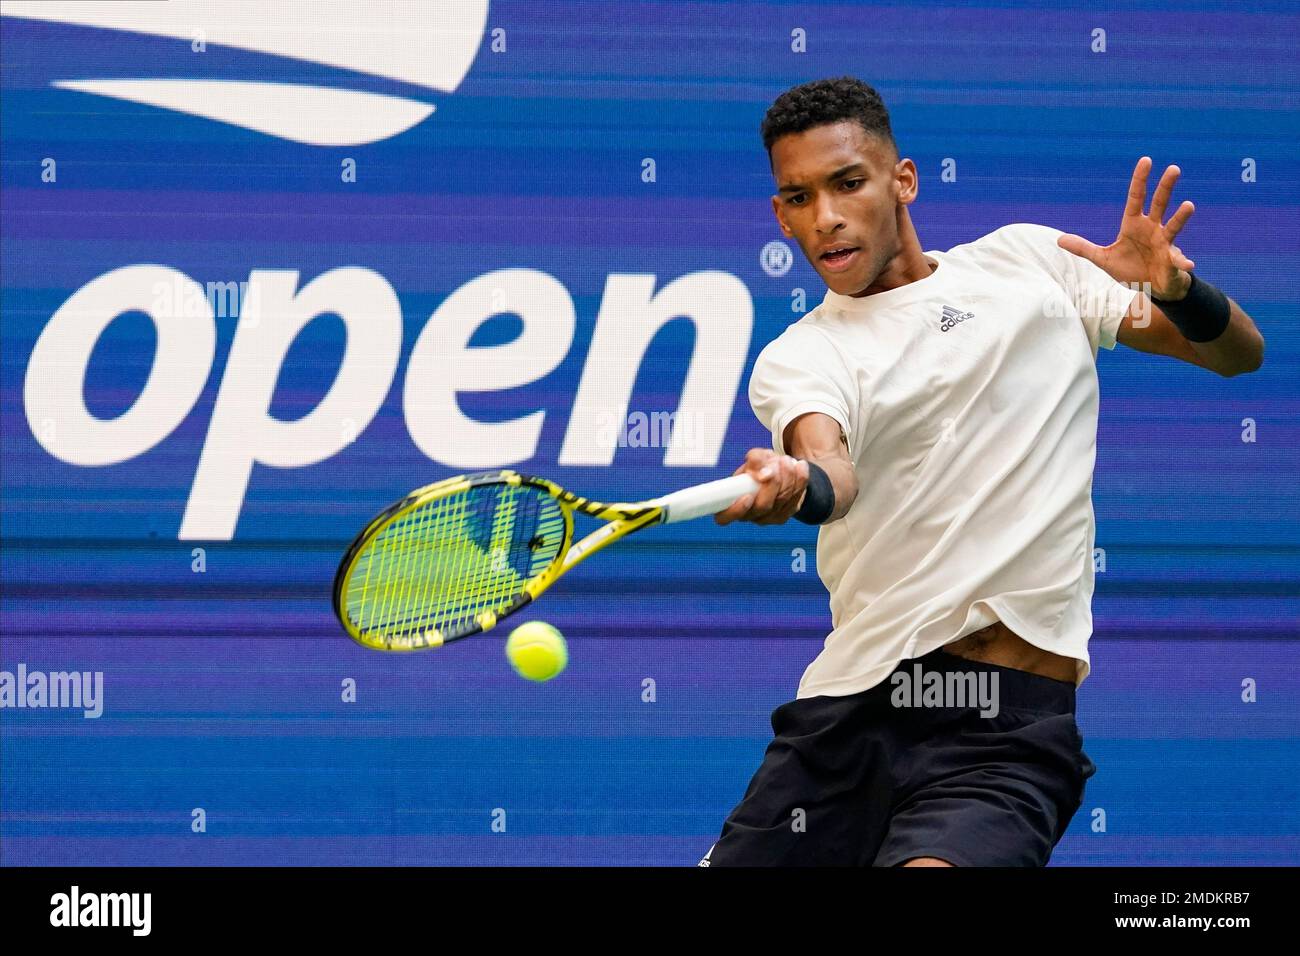 Felix Auger-Aliassime, of Canada, returns a shot to Daniil Medvedev, of Russia, during the semifinals of the US Open tennis championships, Friday, Sept